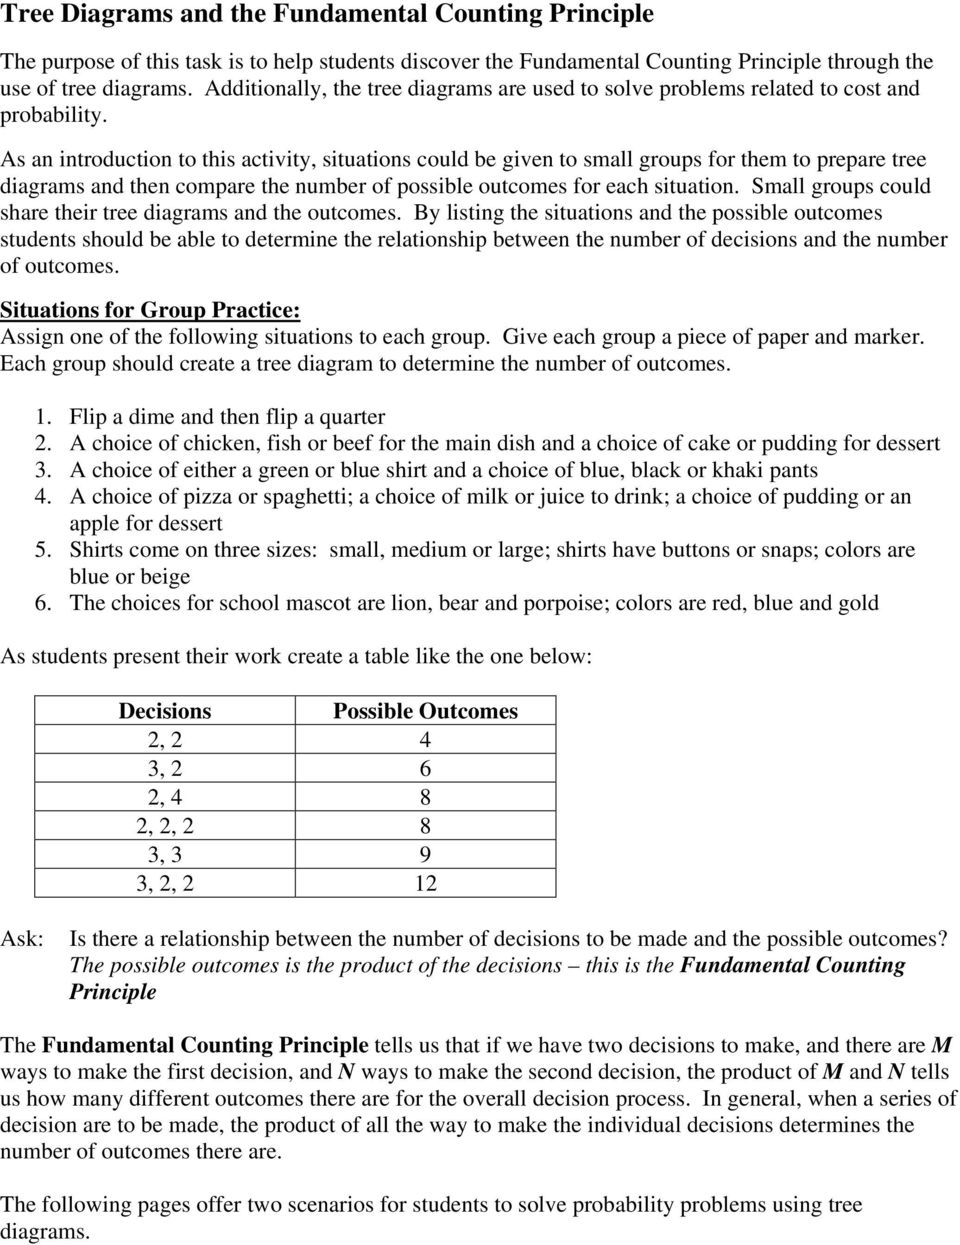 Tree Diagrams and the Fundamental Counting Principle - PDF Free Regarding Fundamental Counting Principle Worksheet